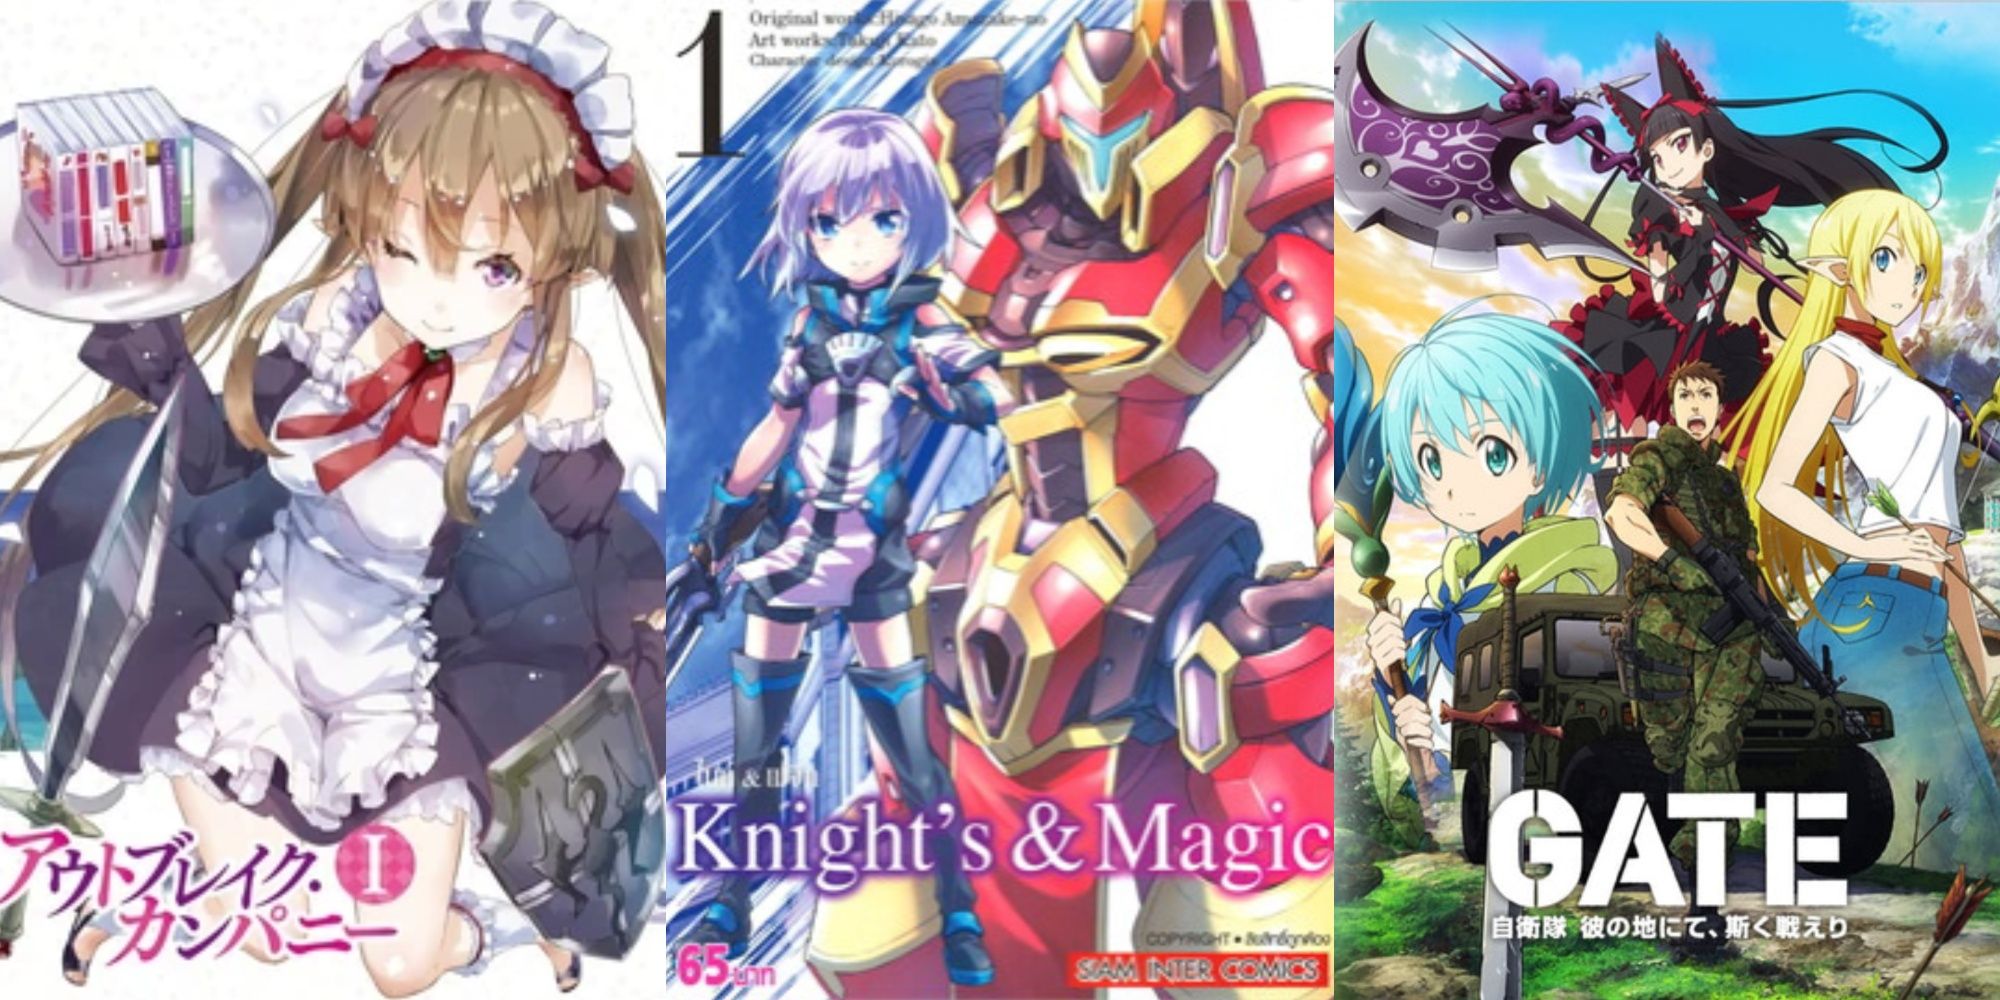 Knight’s & Magic, Outbreak Company and Gate